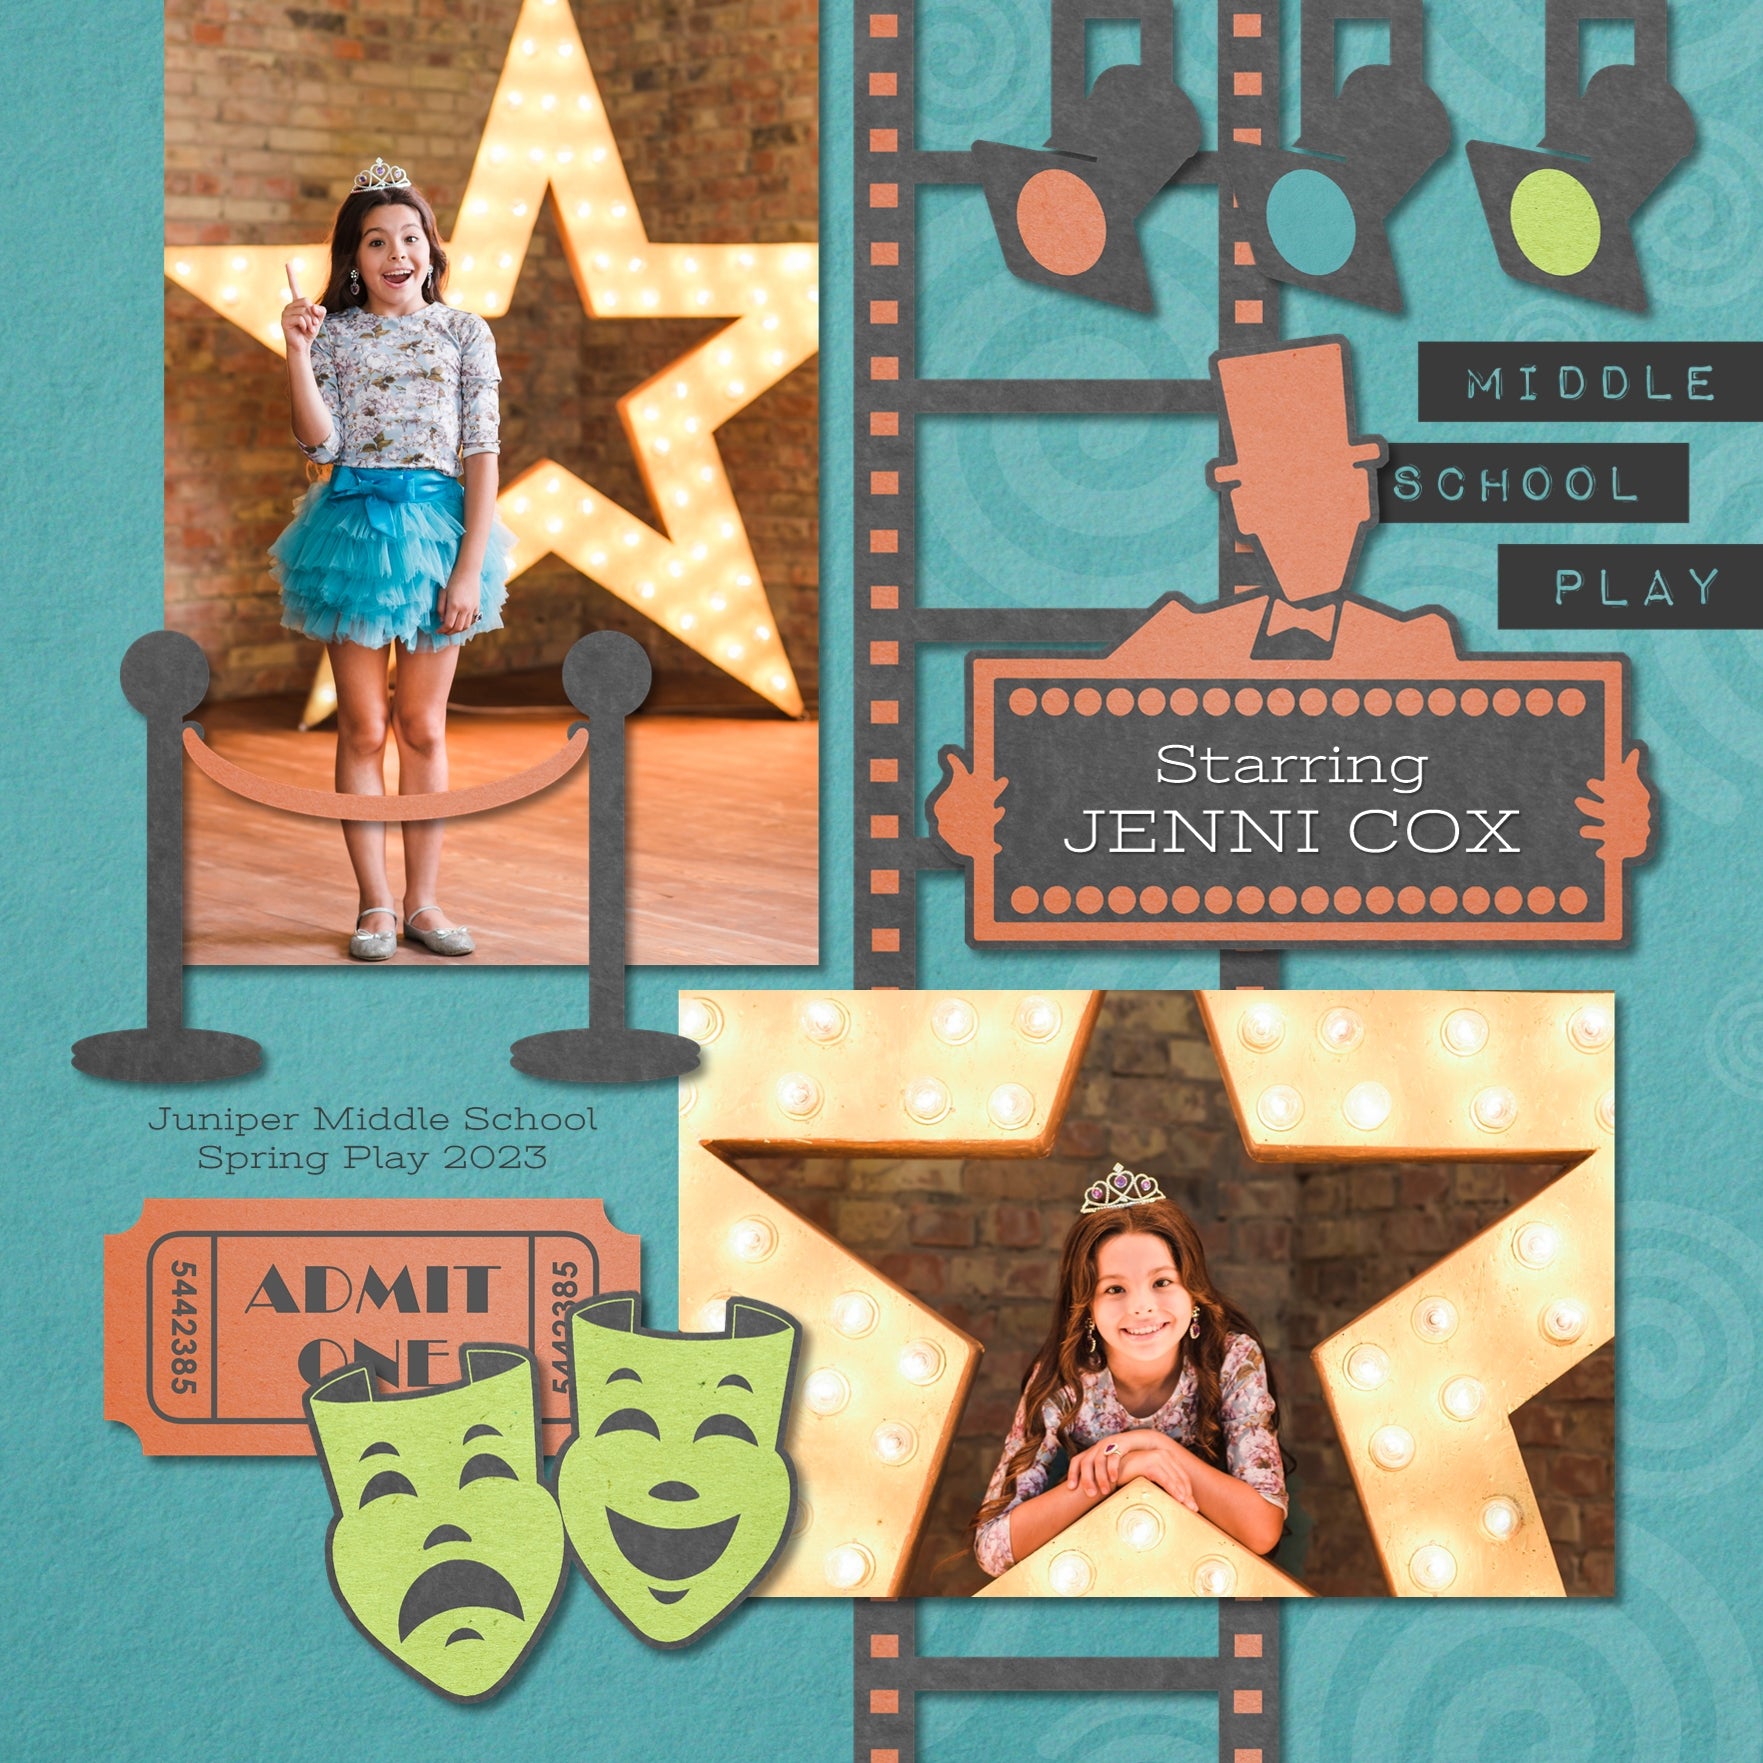 This music and theater-inspired digital art collection, All School Digital Scrapbook Bundle by Lucky Girl Creative, is a collection that you'll use to celebrate each performer in your family. Full of musical instruments, lighting, tickets, movie, theater embellishments and more, this collection is perfect for all school orchestras, bands, music programs, plays, theater performances, and movie nights.